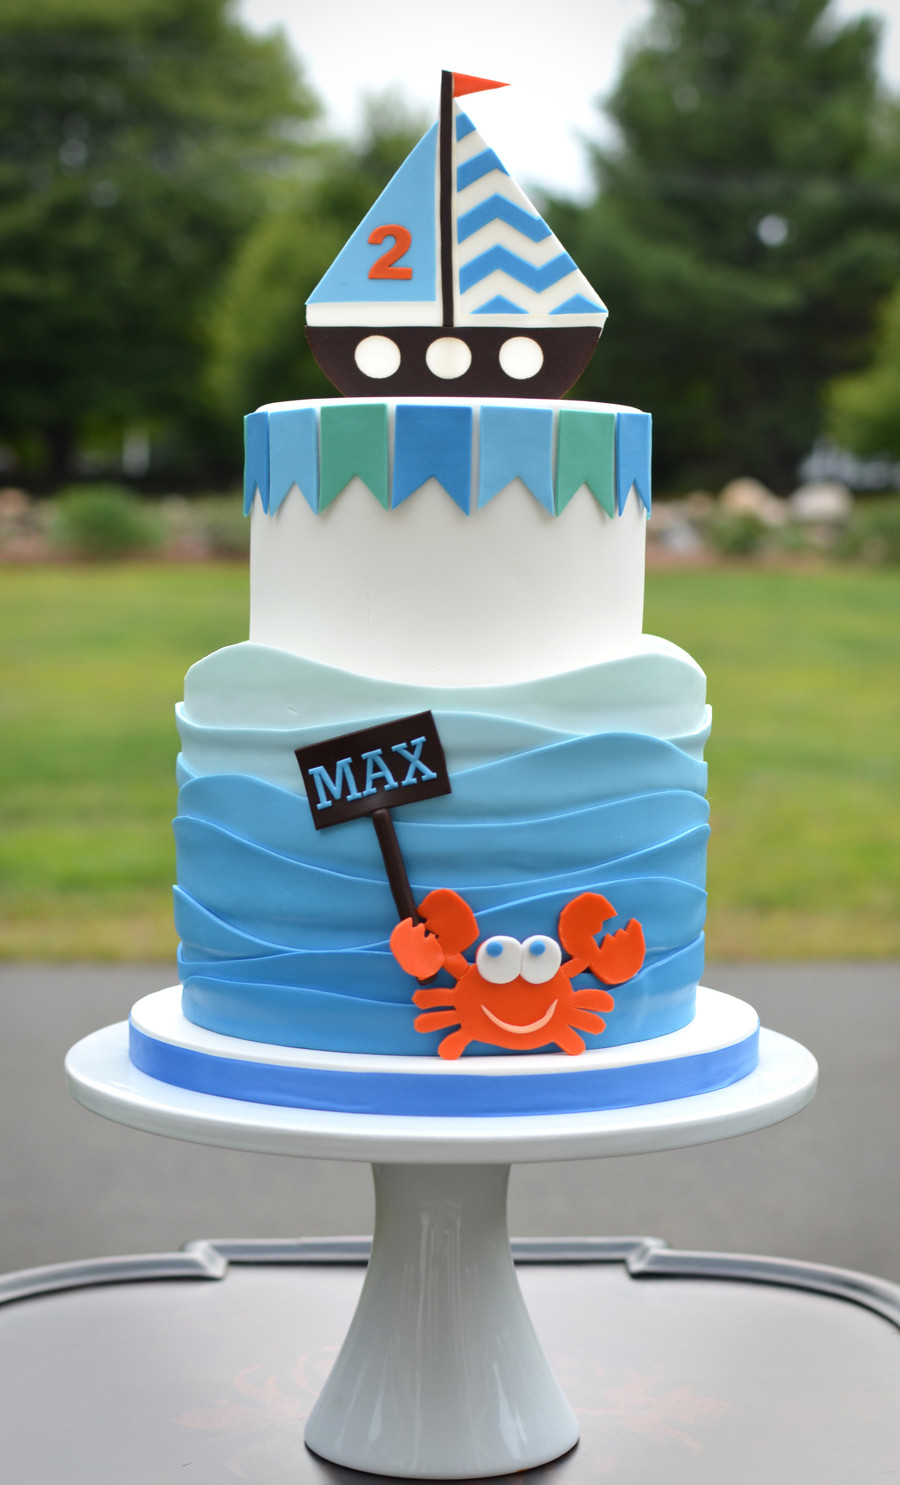 2 Year Old Birthday Cakes
 Fun 2 Year Old Birthday Cake With Waves Sailboat And Crab